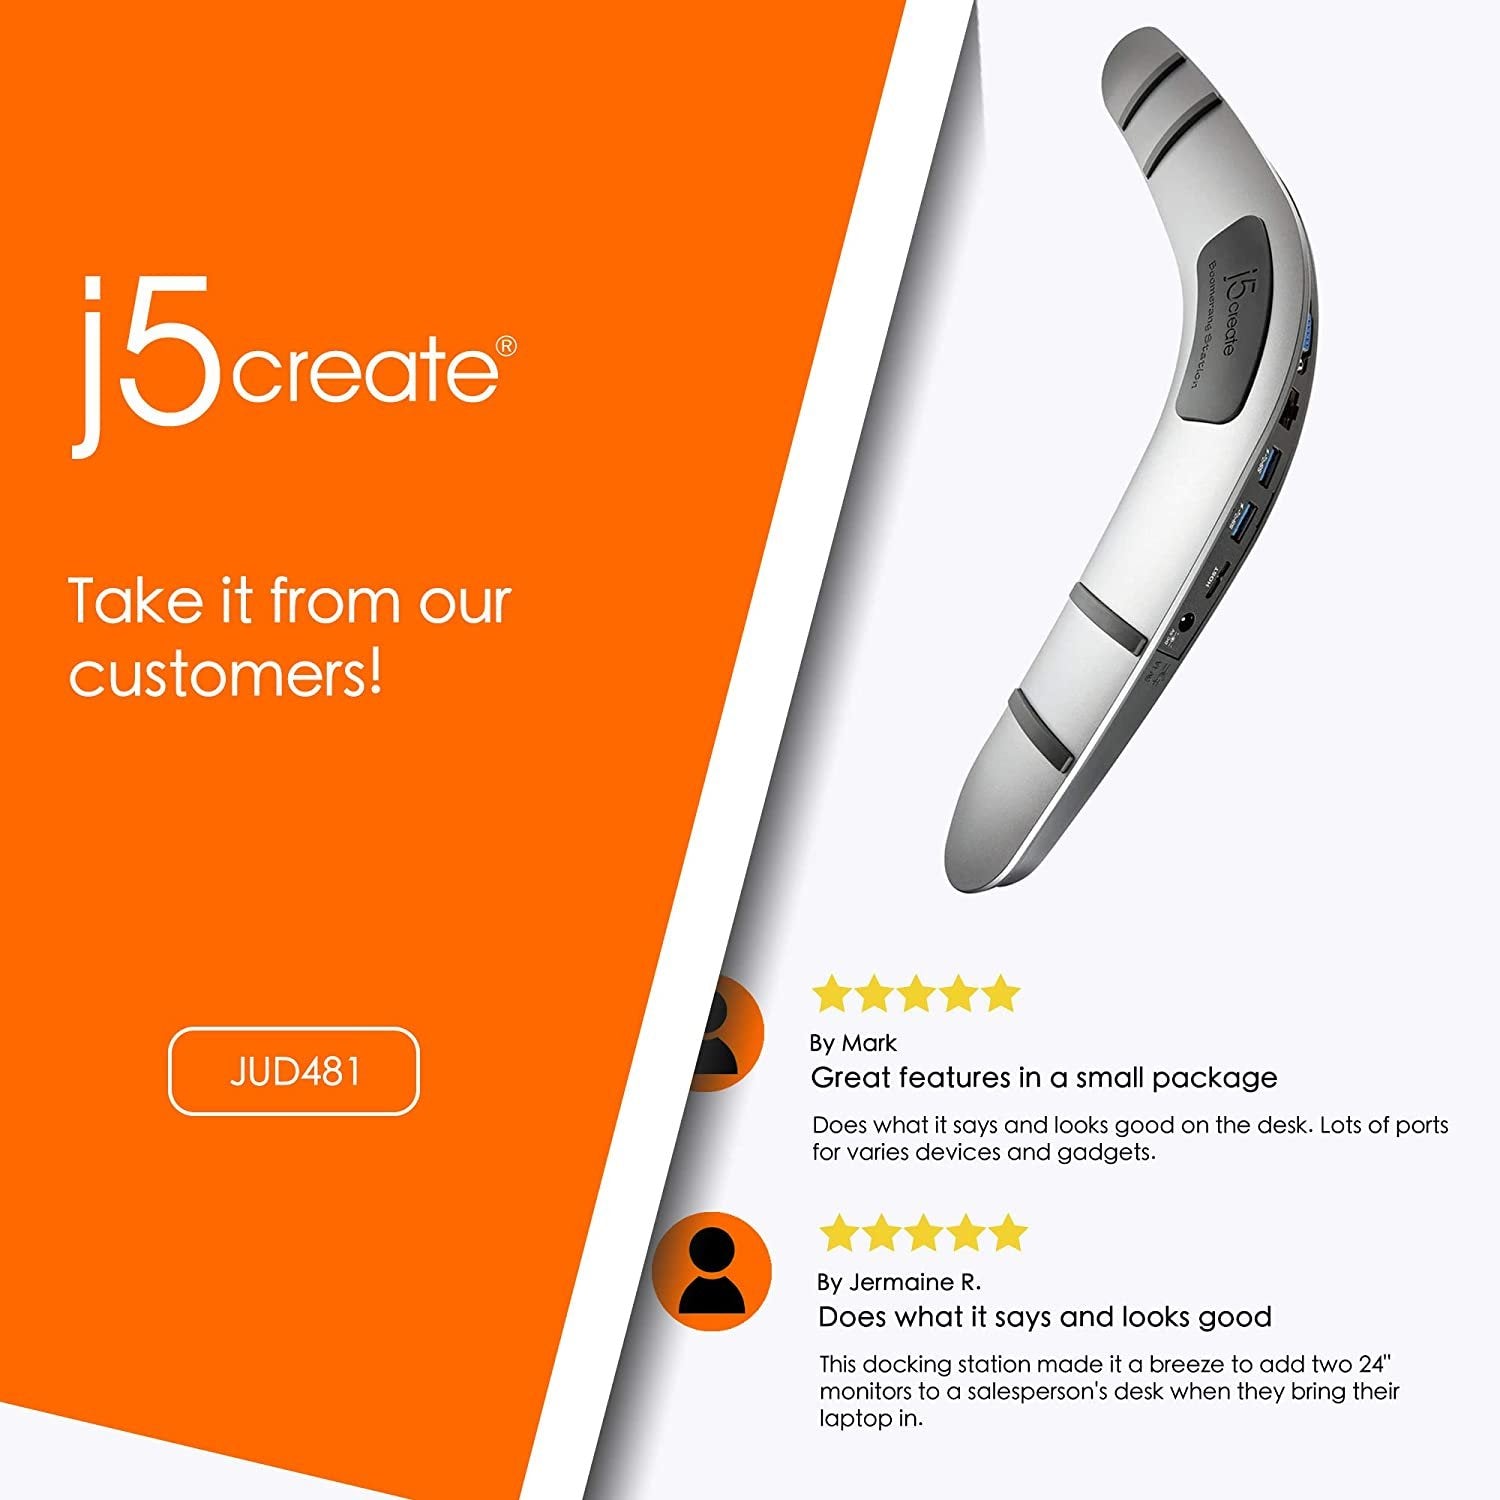 USB 3.0 Boomerang Docking Station by j5create | Full 1080p Resolution | USB 3.0 Host Connection | Gigabit Ethernet | Compatible with Microsoft Windows 7 or Higher and macOS X 10.8 or Later,